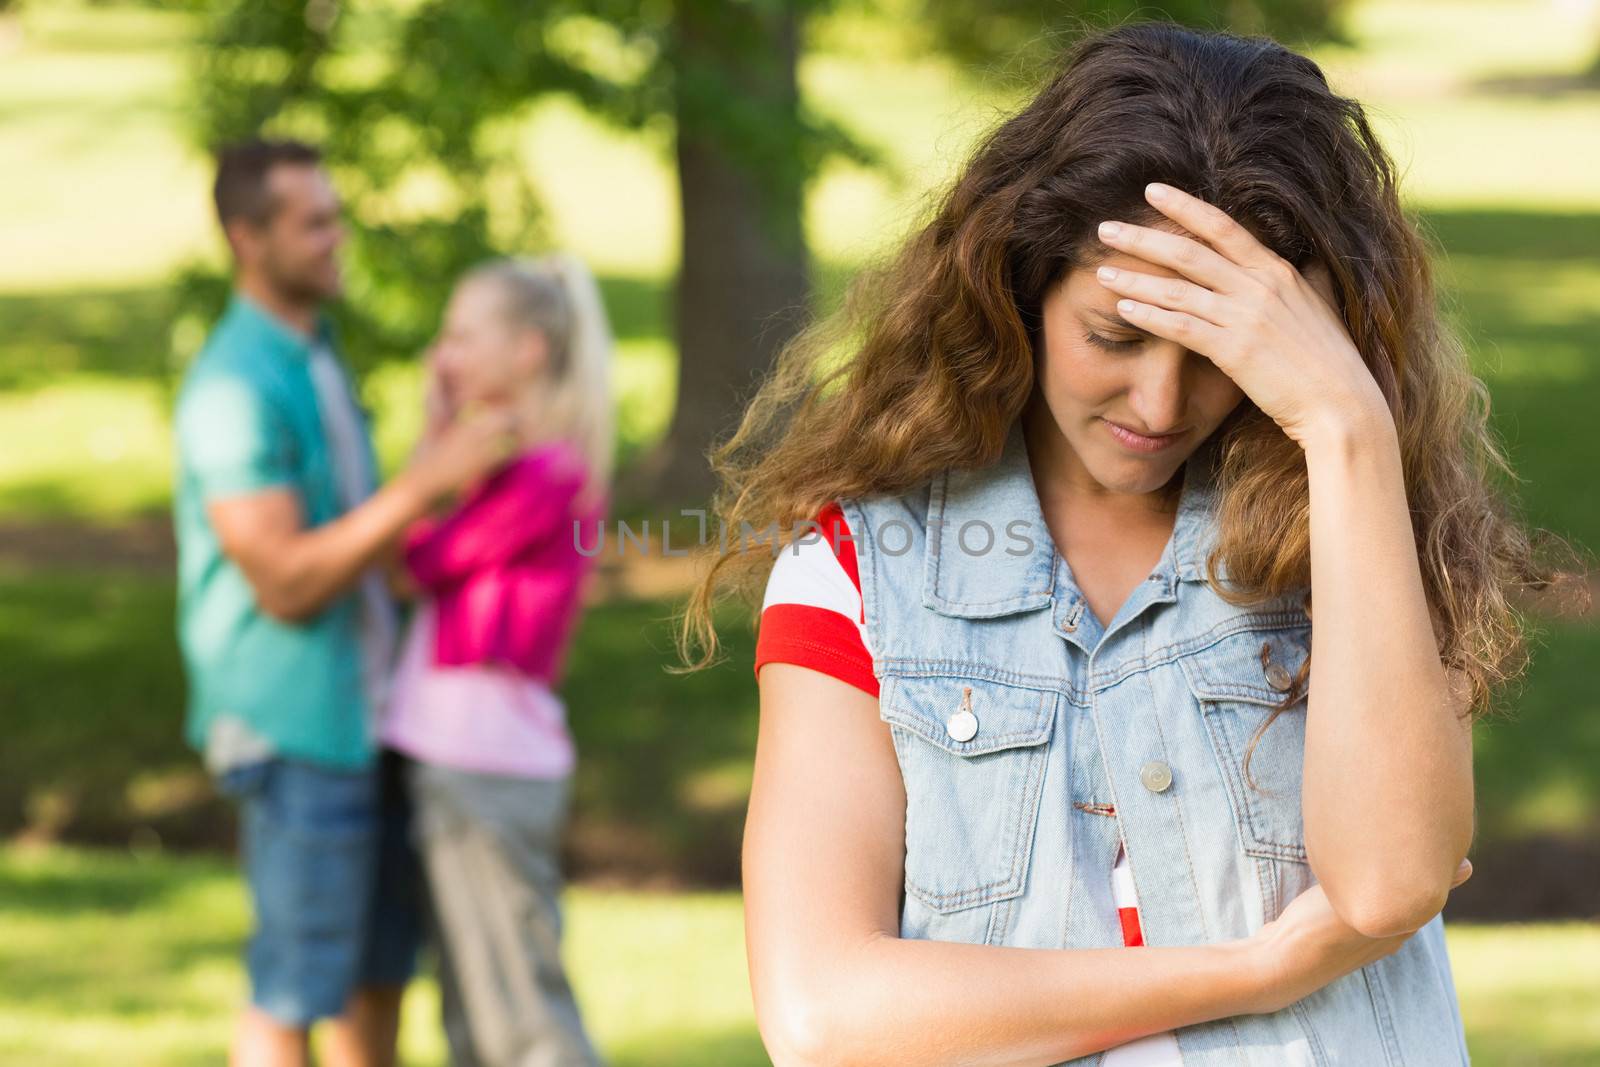 Angry woman with man and girlfriend in background at park by Wavebreakmedia